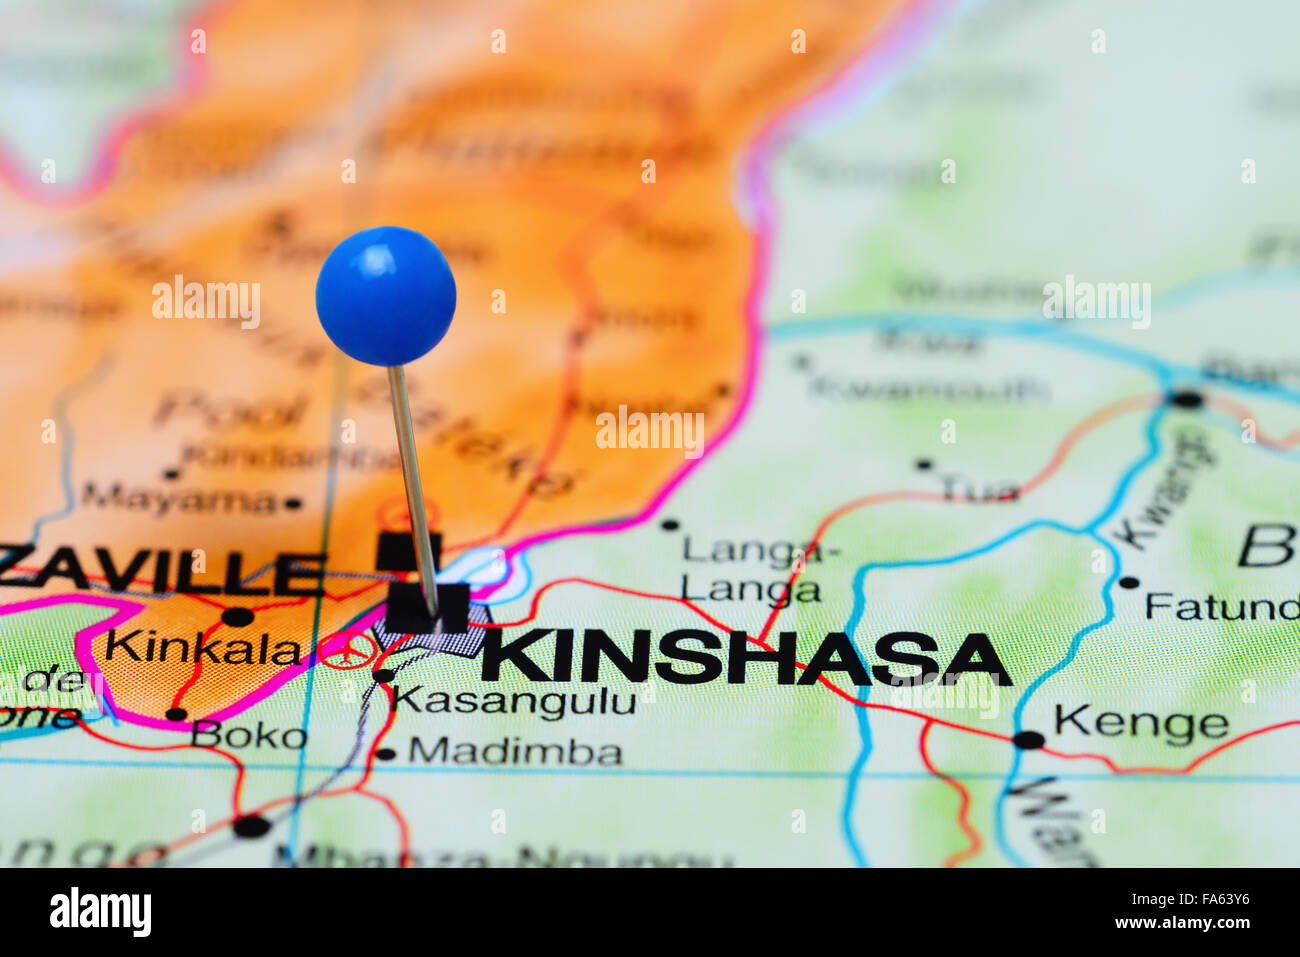 Kinshasa pinned on a map of Africa Stock Photo